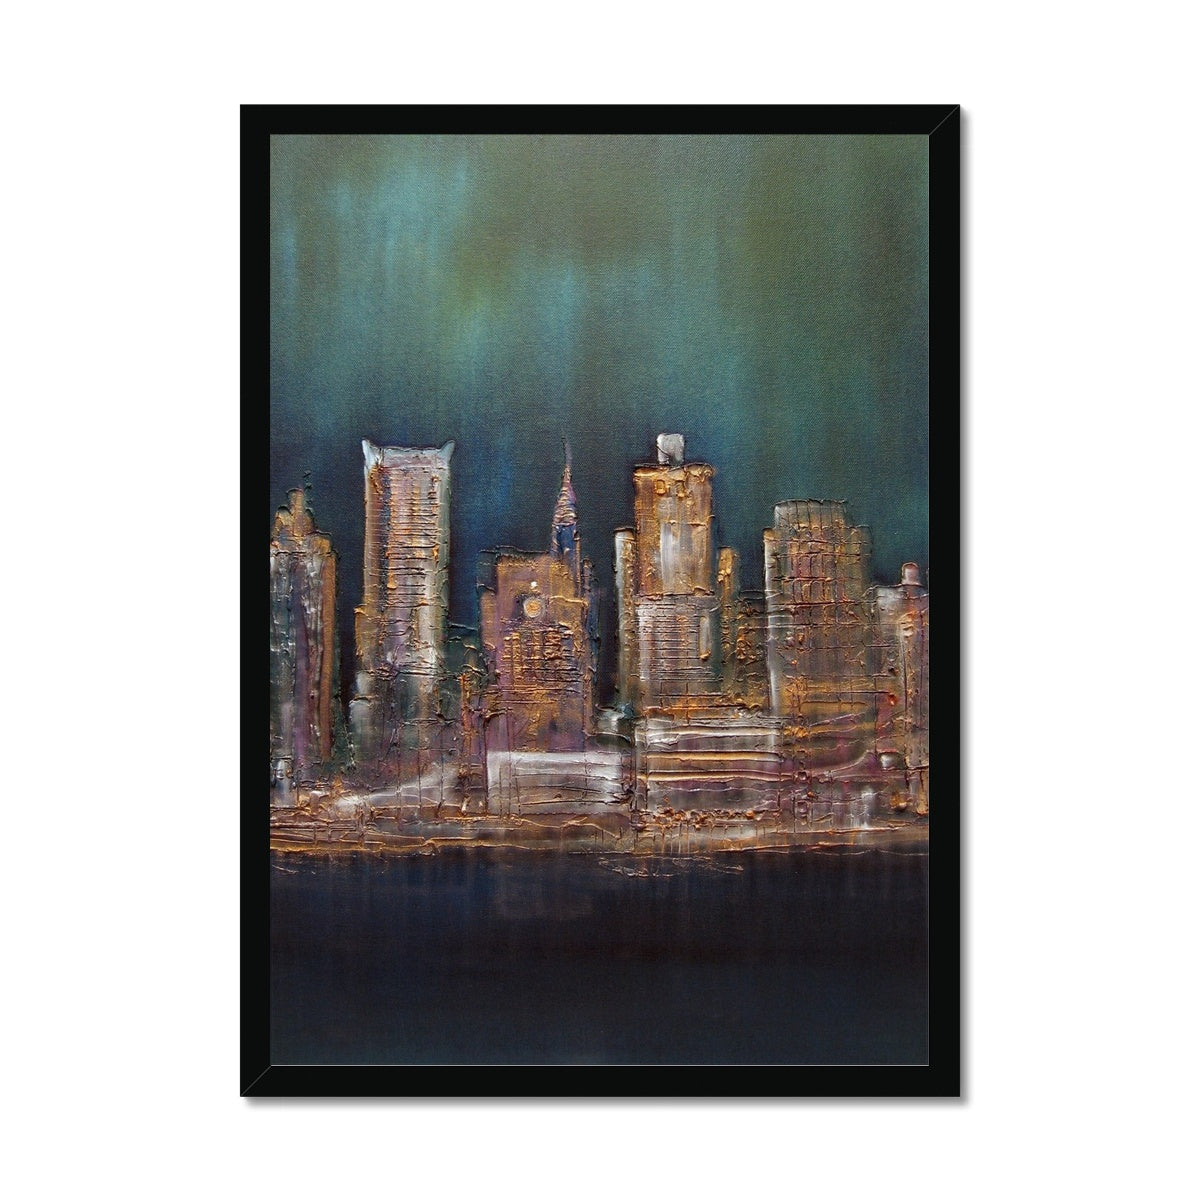 New York West Side Painting | Framed Prints From Scotland-Framed Prints-World Art Gallery-A2 Portrait-Black Frame-Paintings, Prints, Homeware, Art Gifts From Scotland By Scottish Artist Kevin Hunter